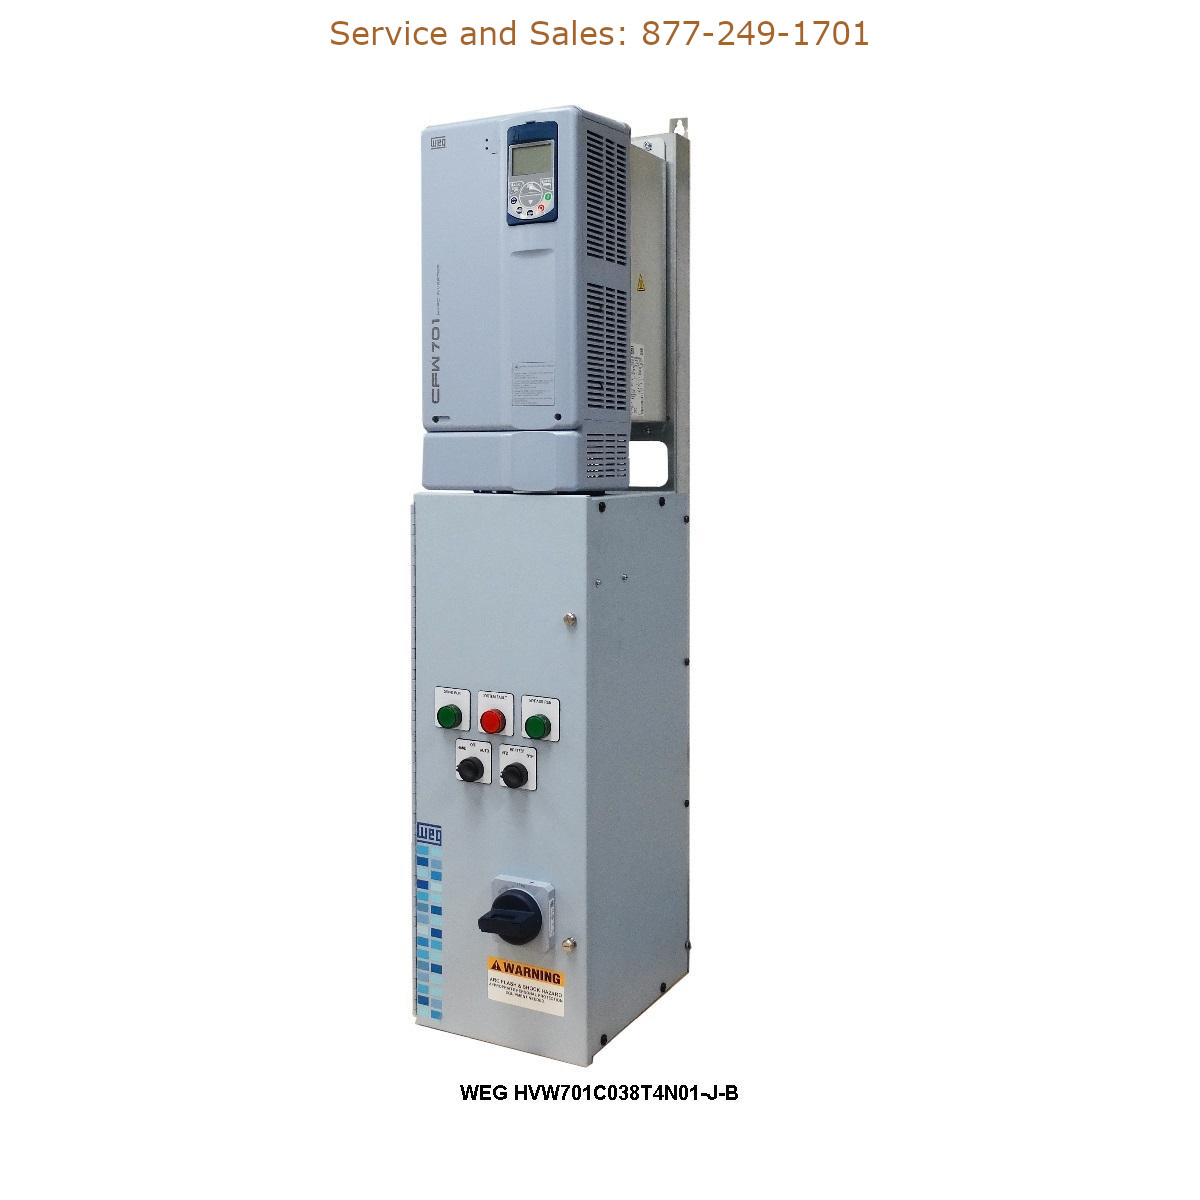 WEG HVW701C038T4N01-J-B WEG Model Number HVW701C038T4N01-J-B WEG Drives, Variable Speed Drives Repair Service, Troubleshooting, Replacement Parts https://gesrepair.com/wp-content/uploads/2022/WEG/WEG_HVW701C038T4N01-J-B_Drives_Variable_Speed_Drives.jpg